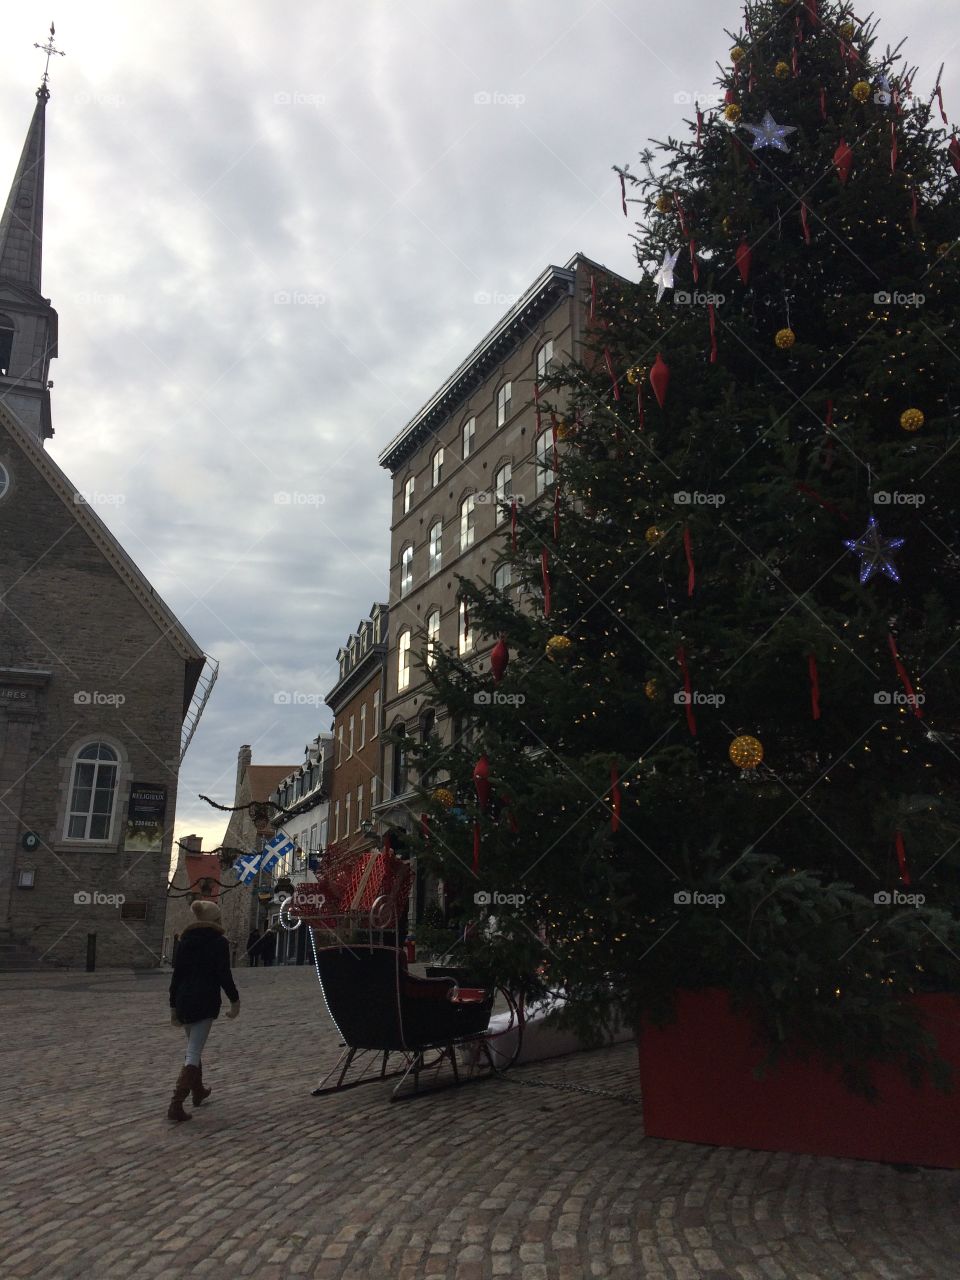 Christmas tree in Old Town Quebec 